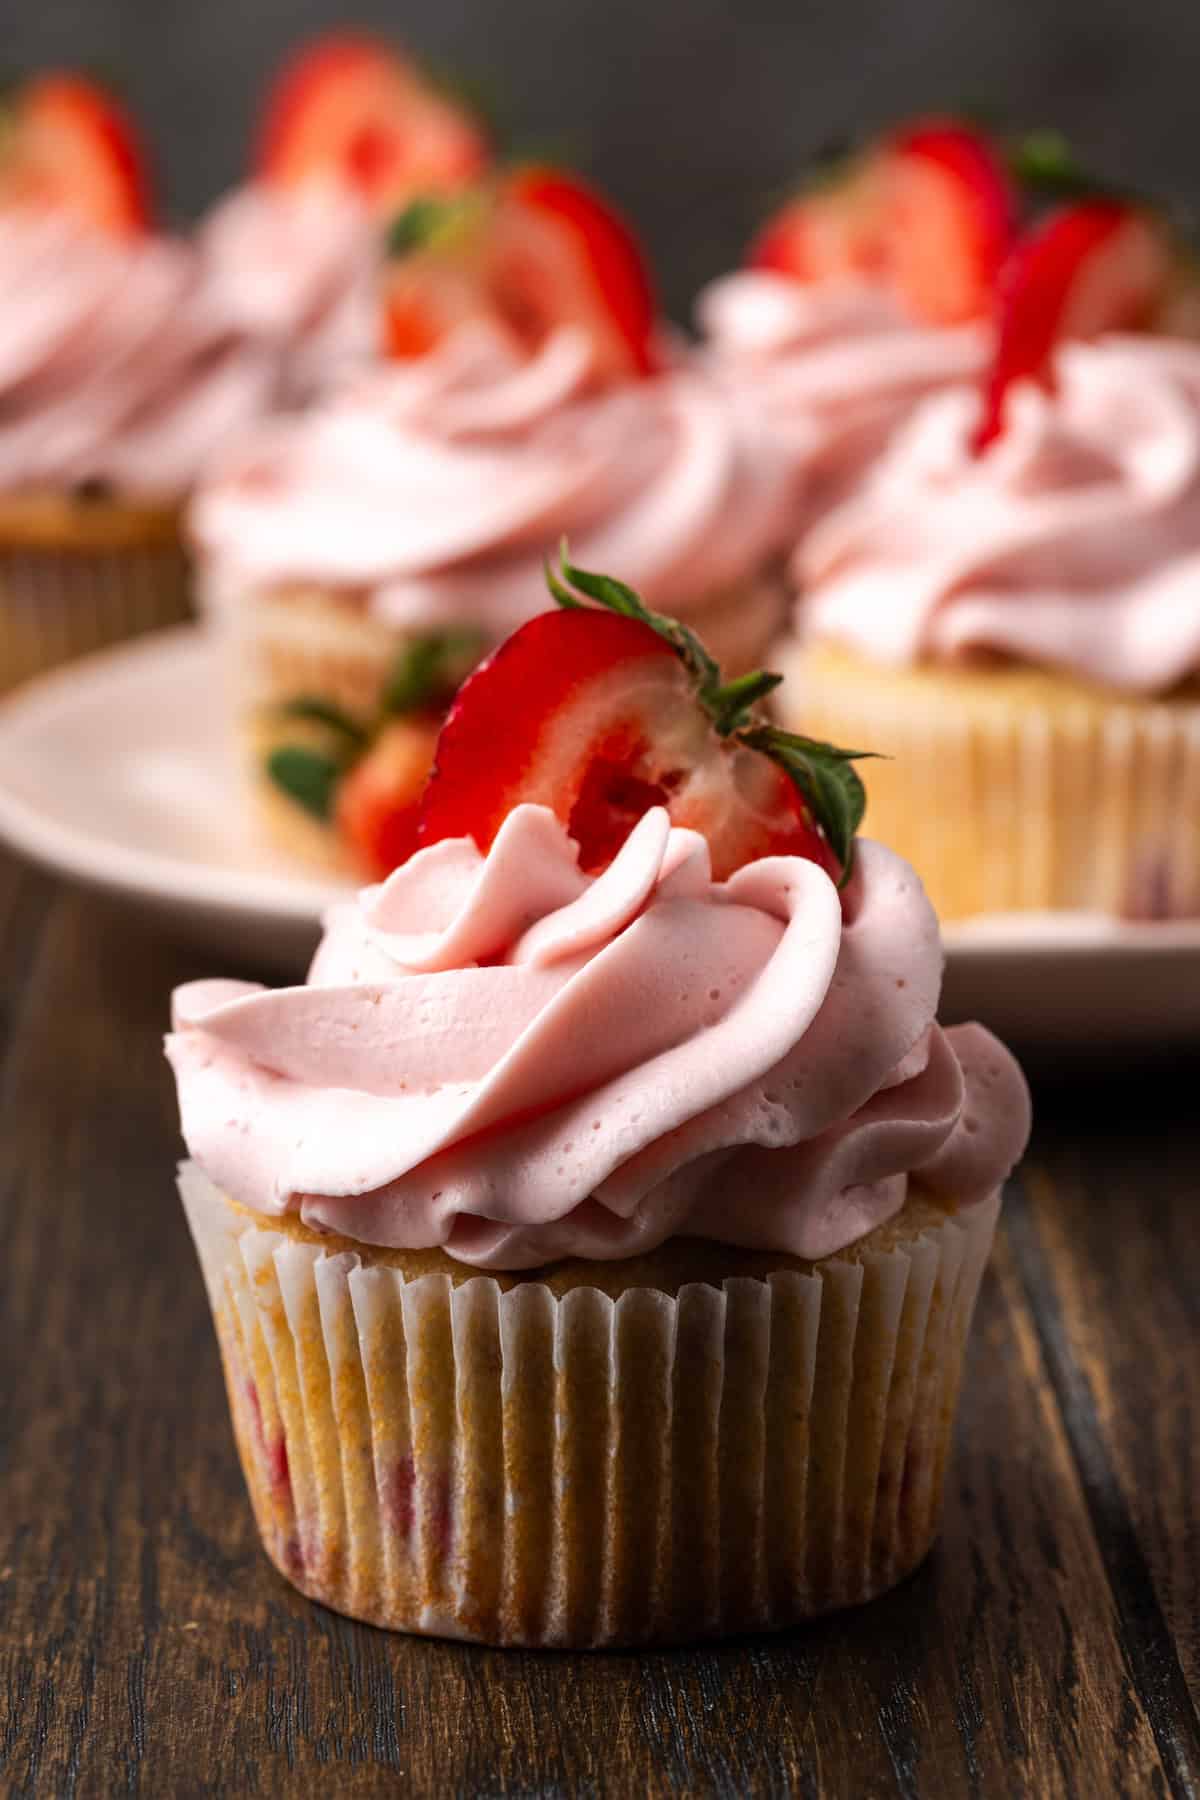 Close up of a strawberry cupcake frosted with strawberry Swiss meringue buttercream and topped with a fresh strawberry half, with more frosted cupcakes on a plate in the background.